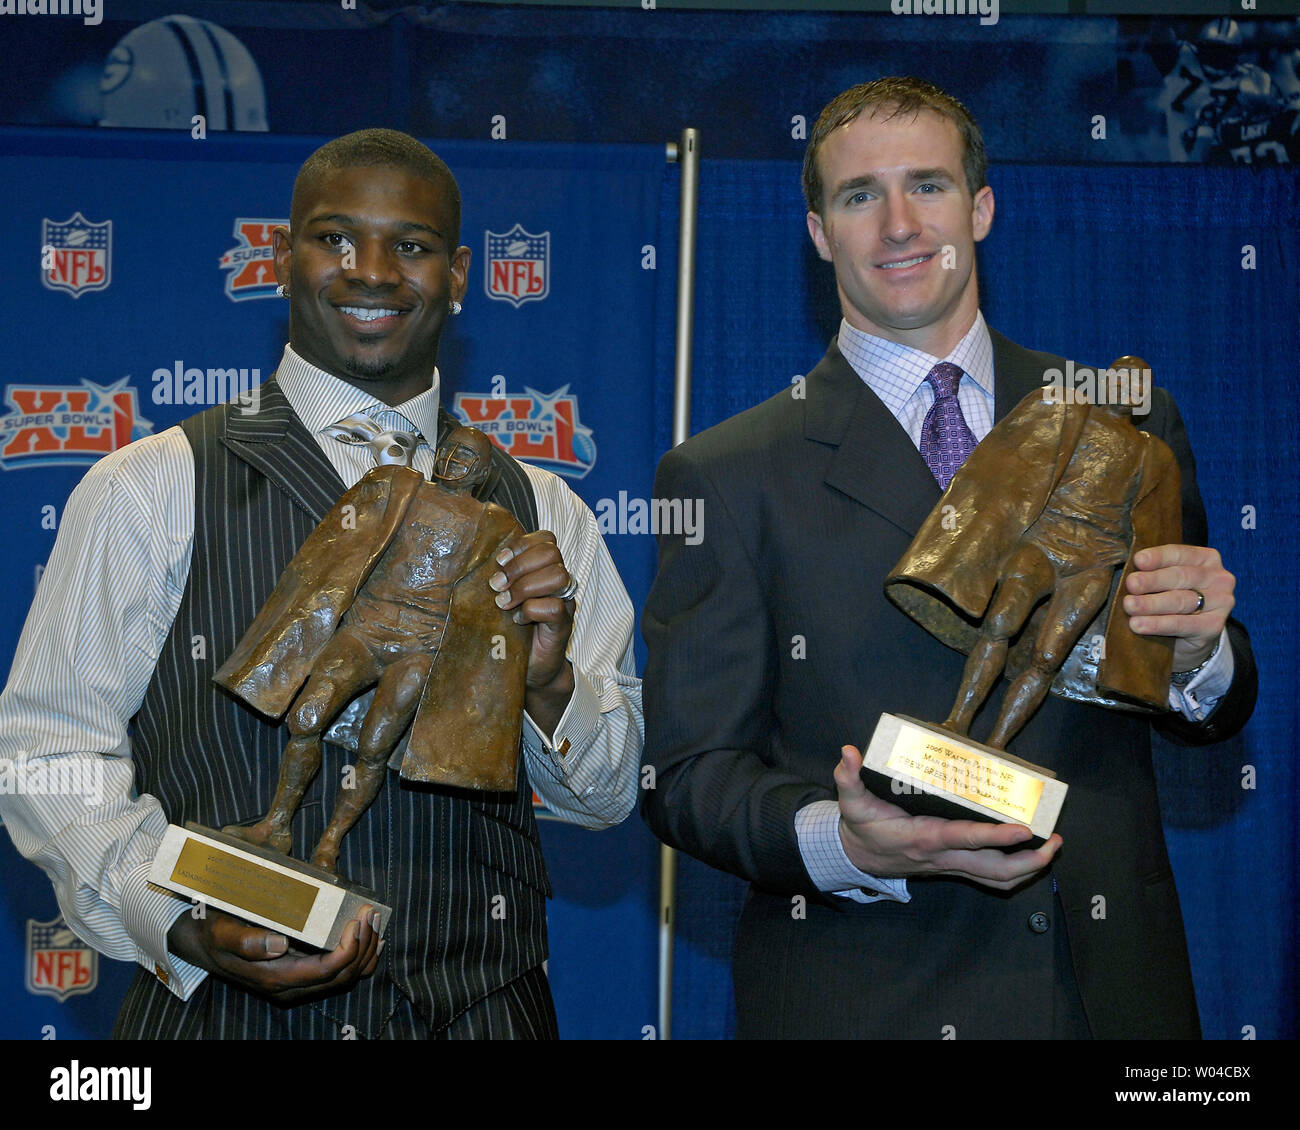 San Diego Chargers running back LaDainian Tomlinson and New Orleans Saints quarterback Drew Brees hold their Walter Payton Awards following a Super Bowl XLI press briefing in Miami on February 2, 2007. (UPI Photo-Joe Marino/Bill Cantrell) Stock Photo